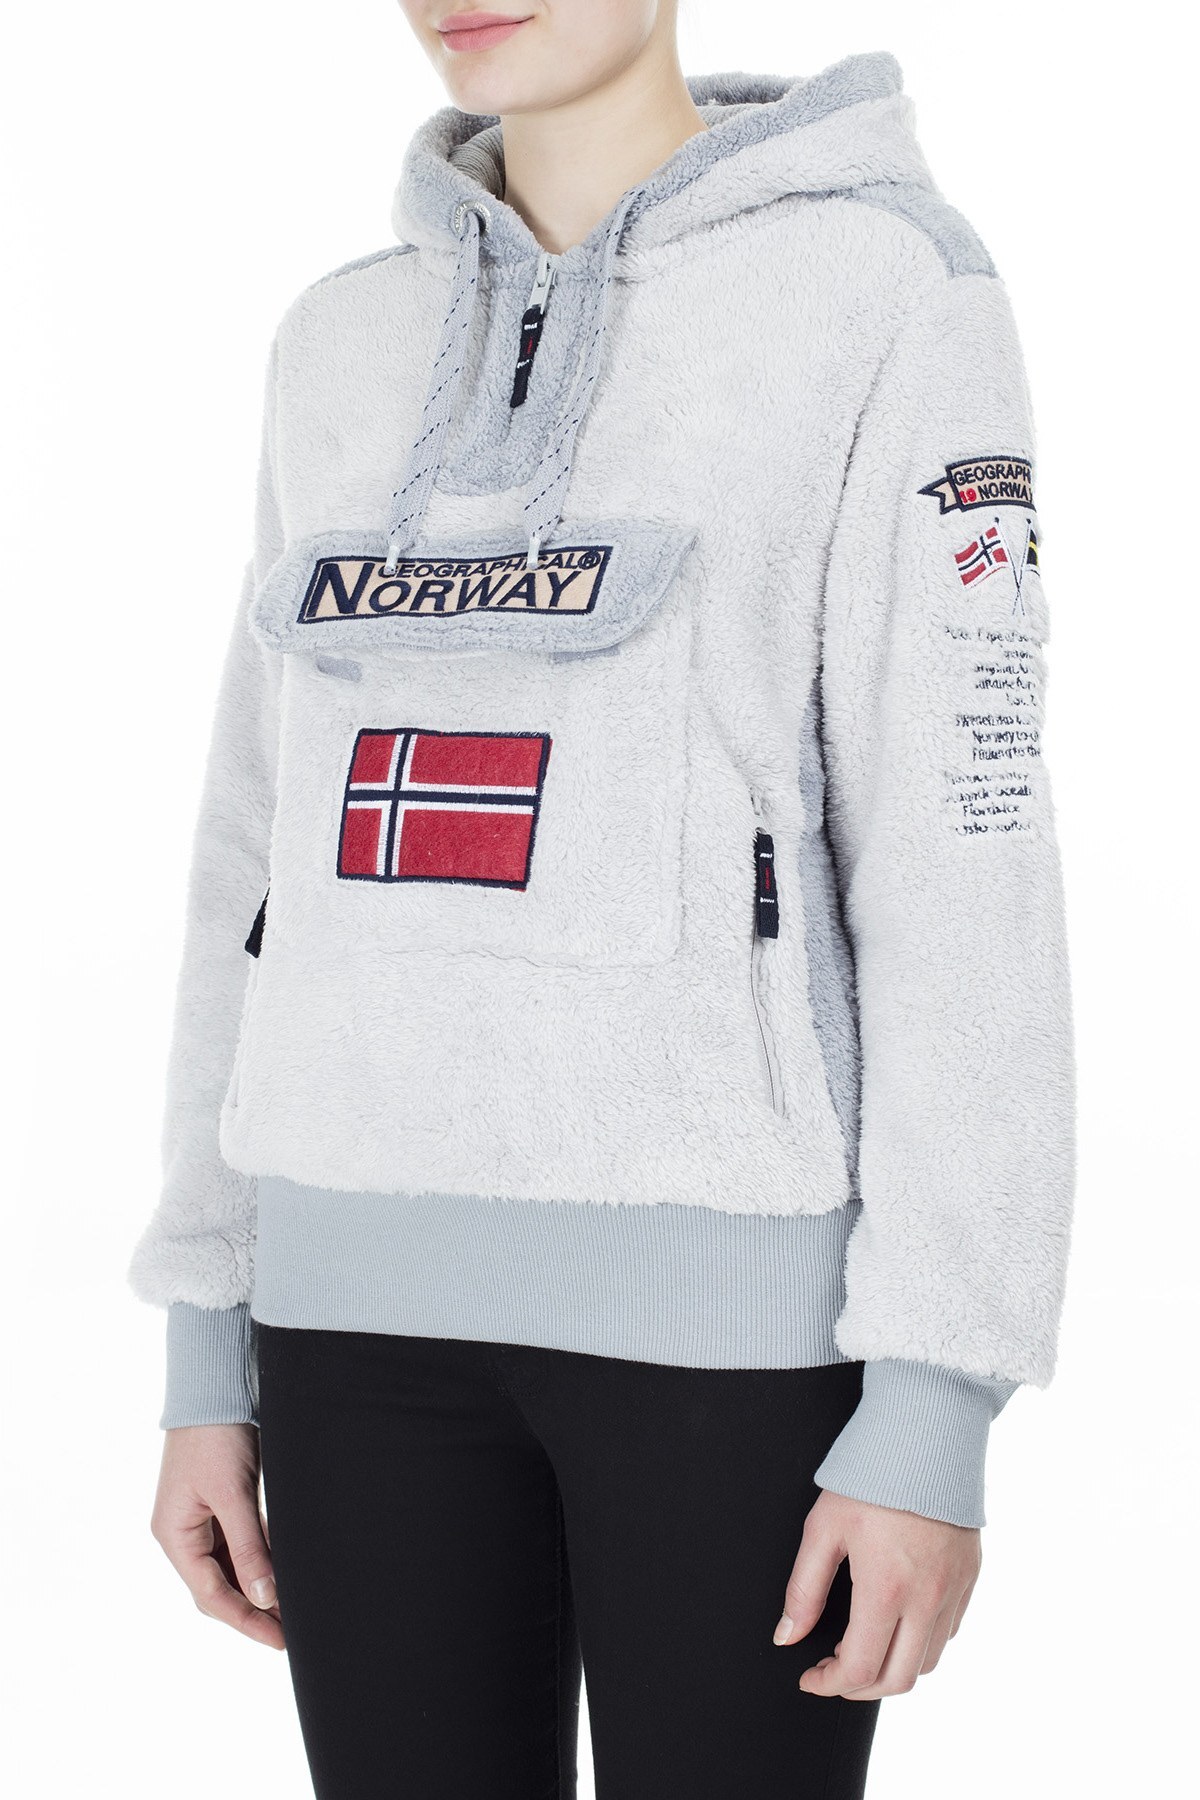 Norway Geographical Outdoor Bayan Sweat GYMCLASS GRİ